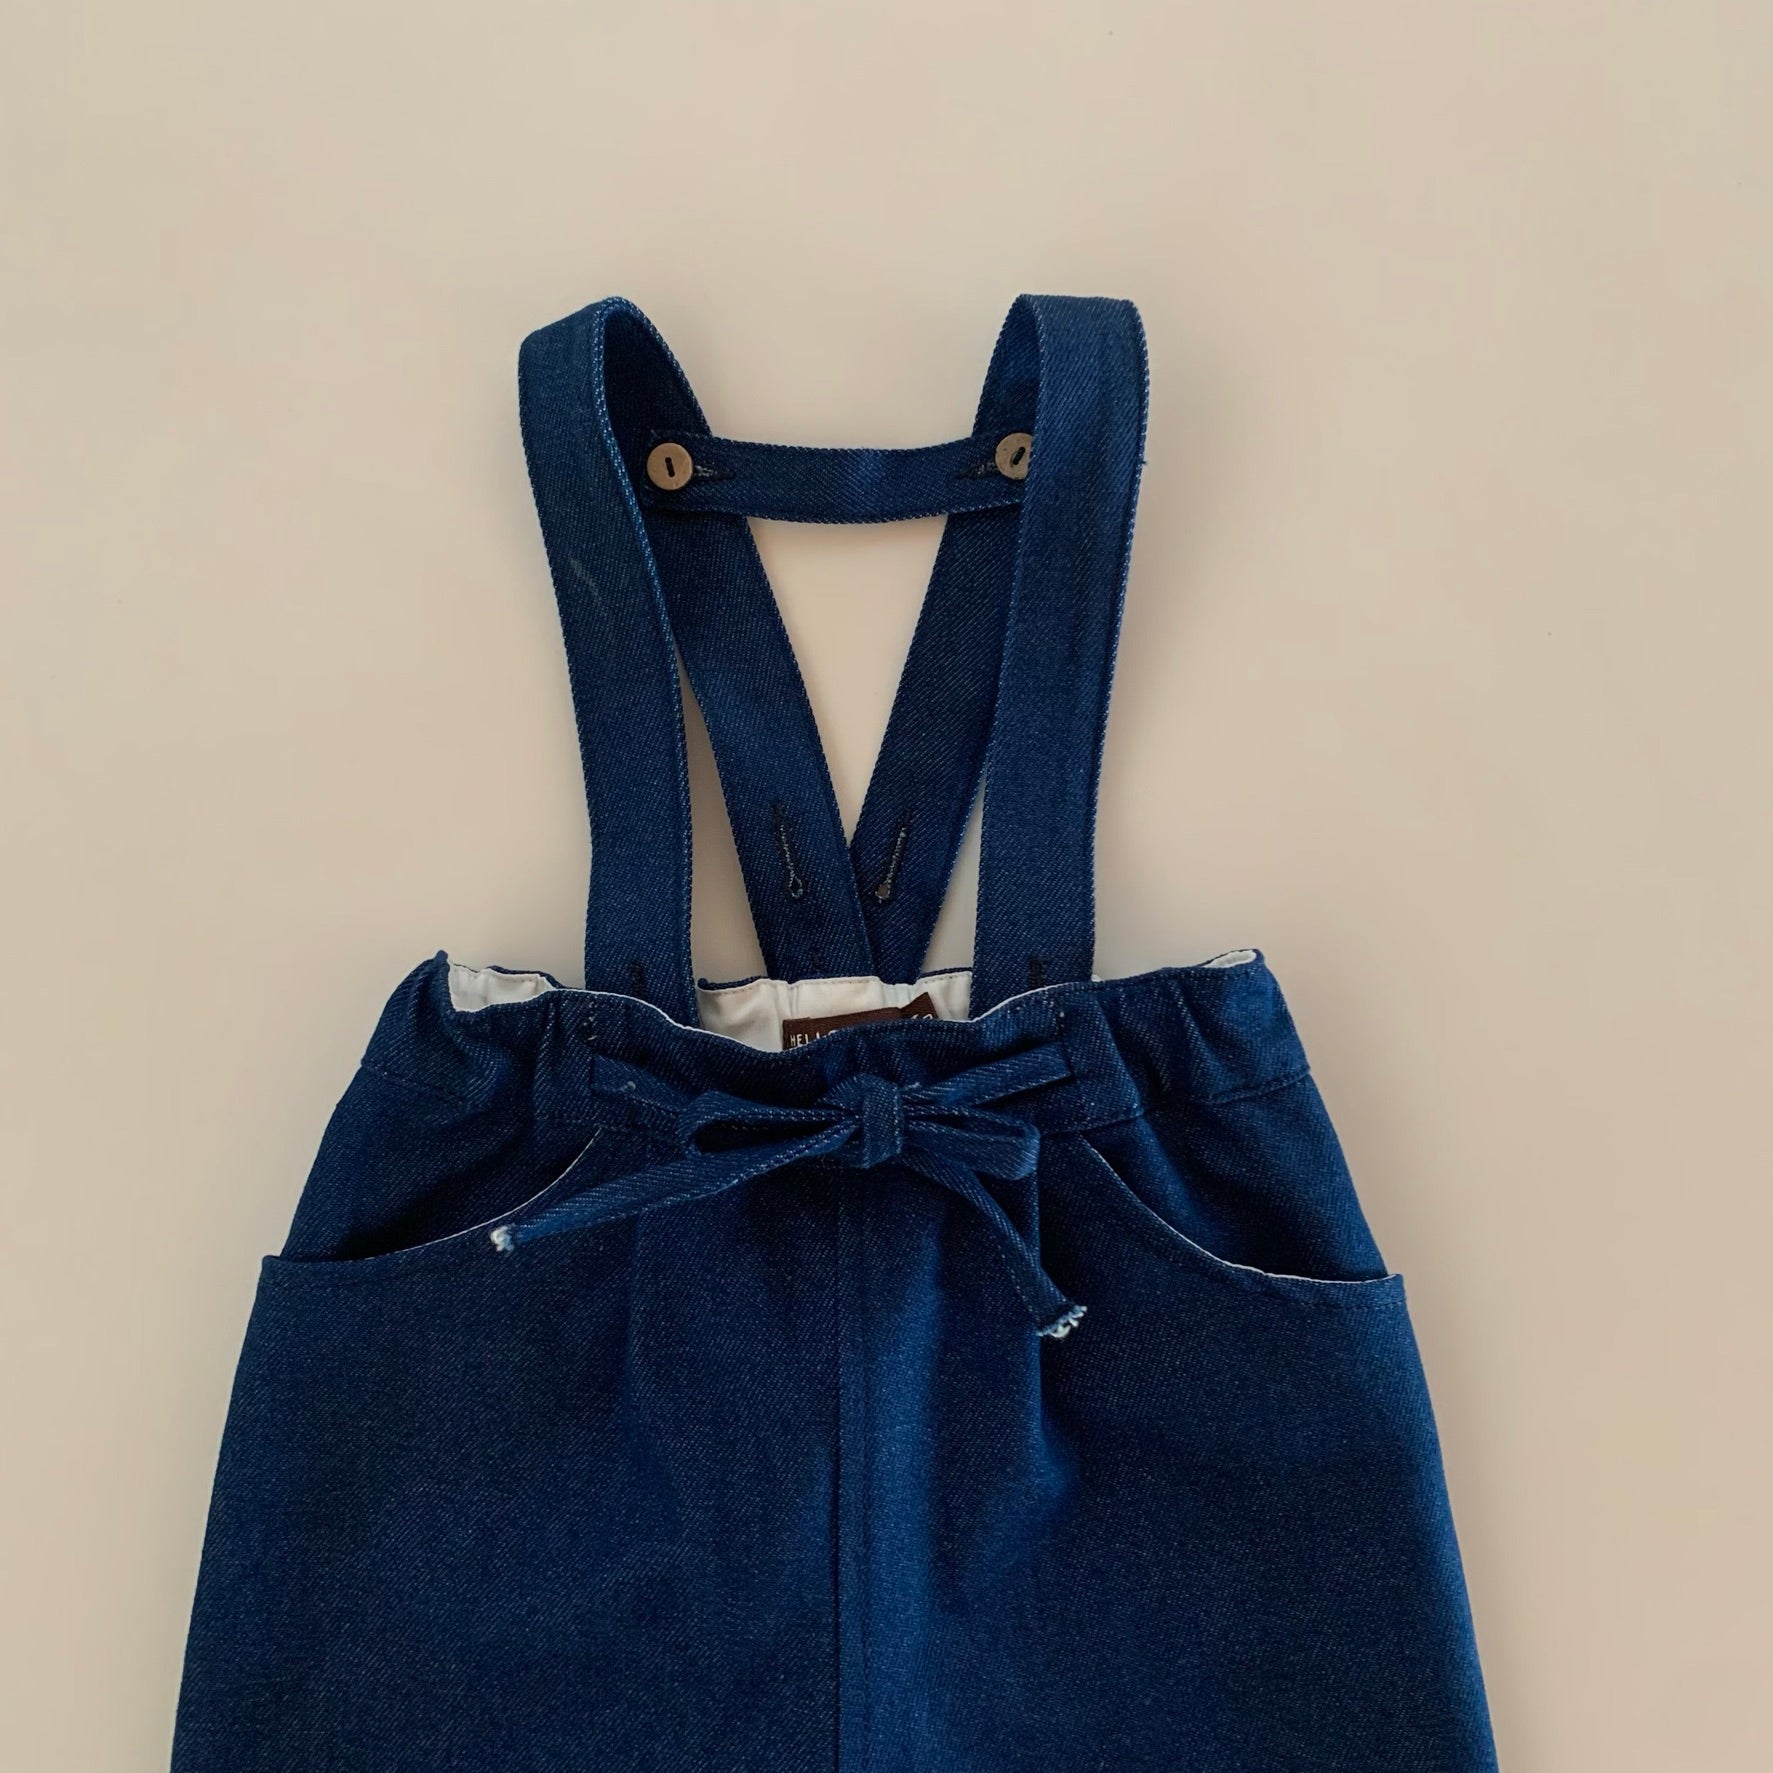 Hello Lupo Blue Denim Jeans With Removable Overall Straps, Tie Waist, Front And Back Pockets. 